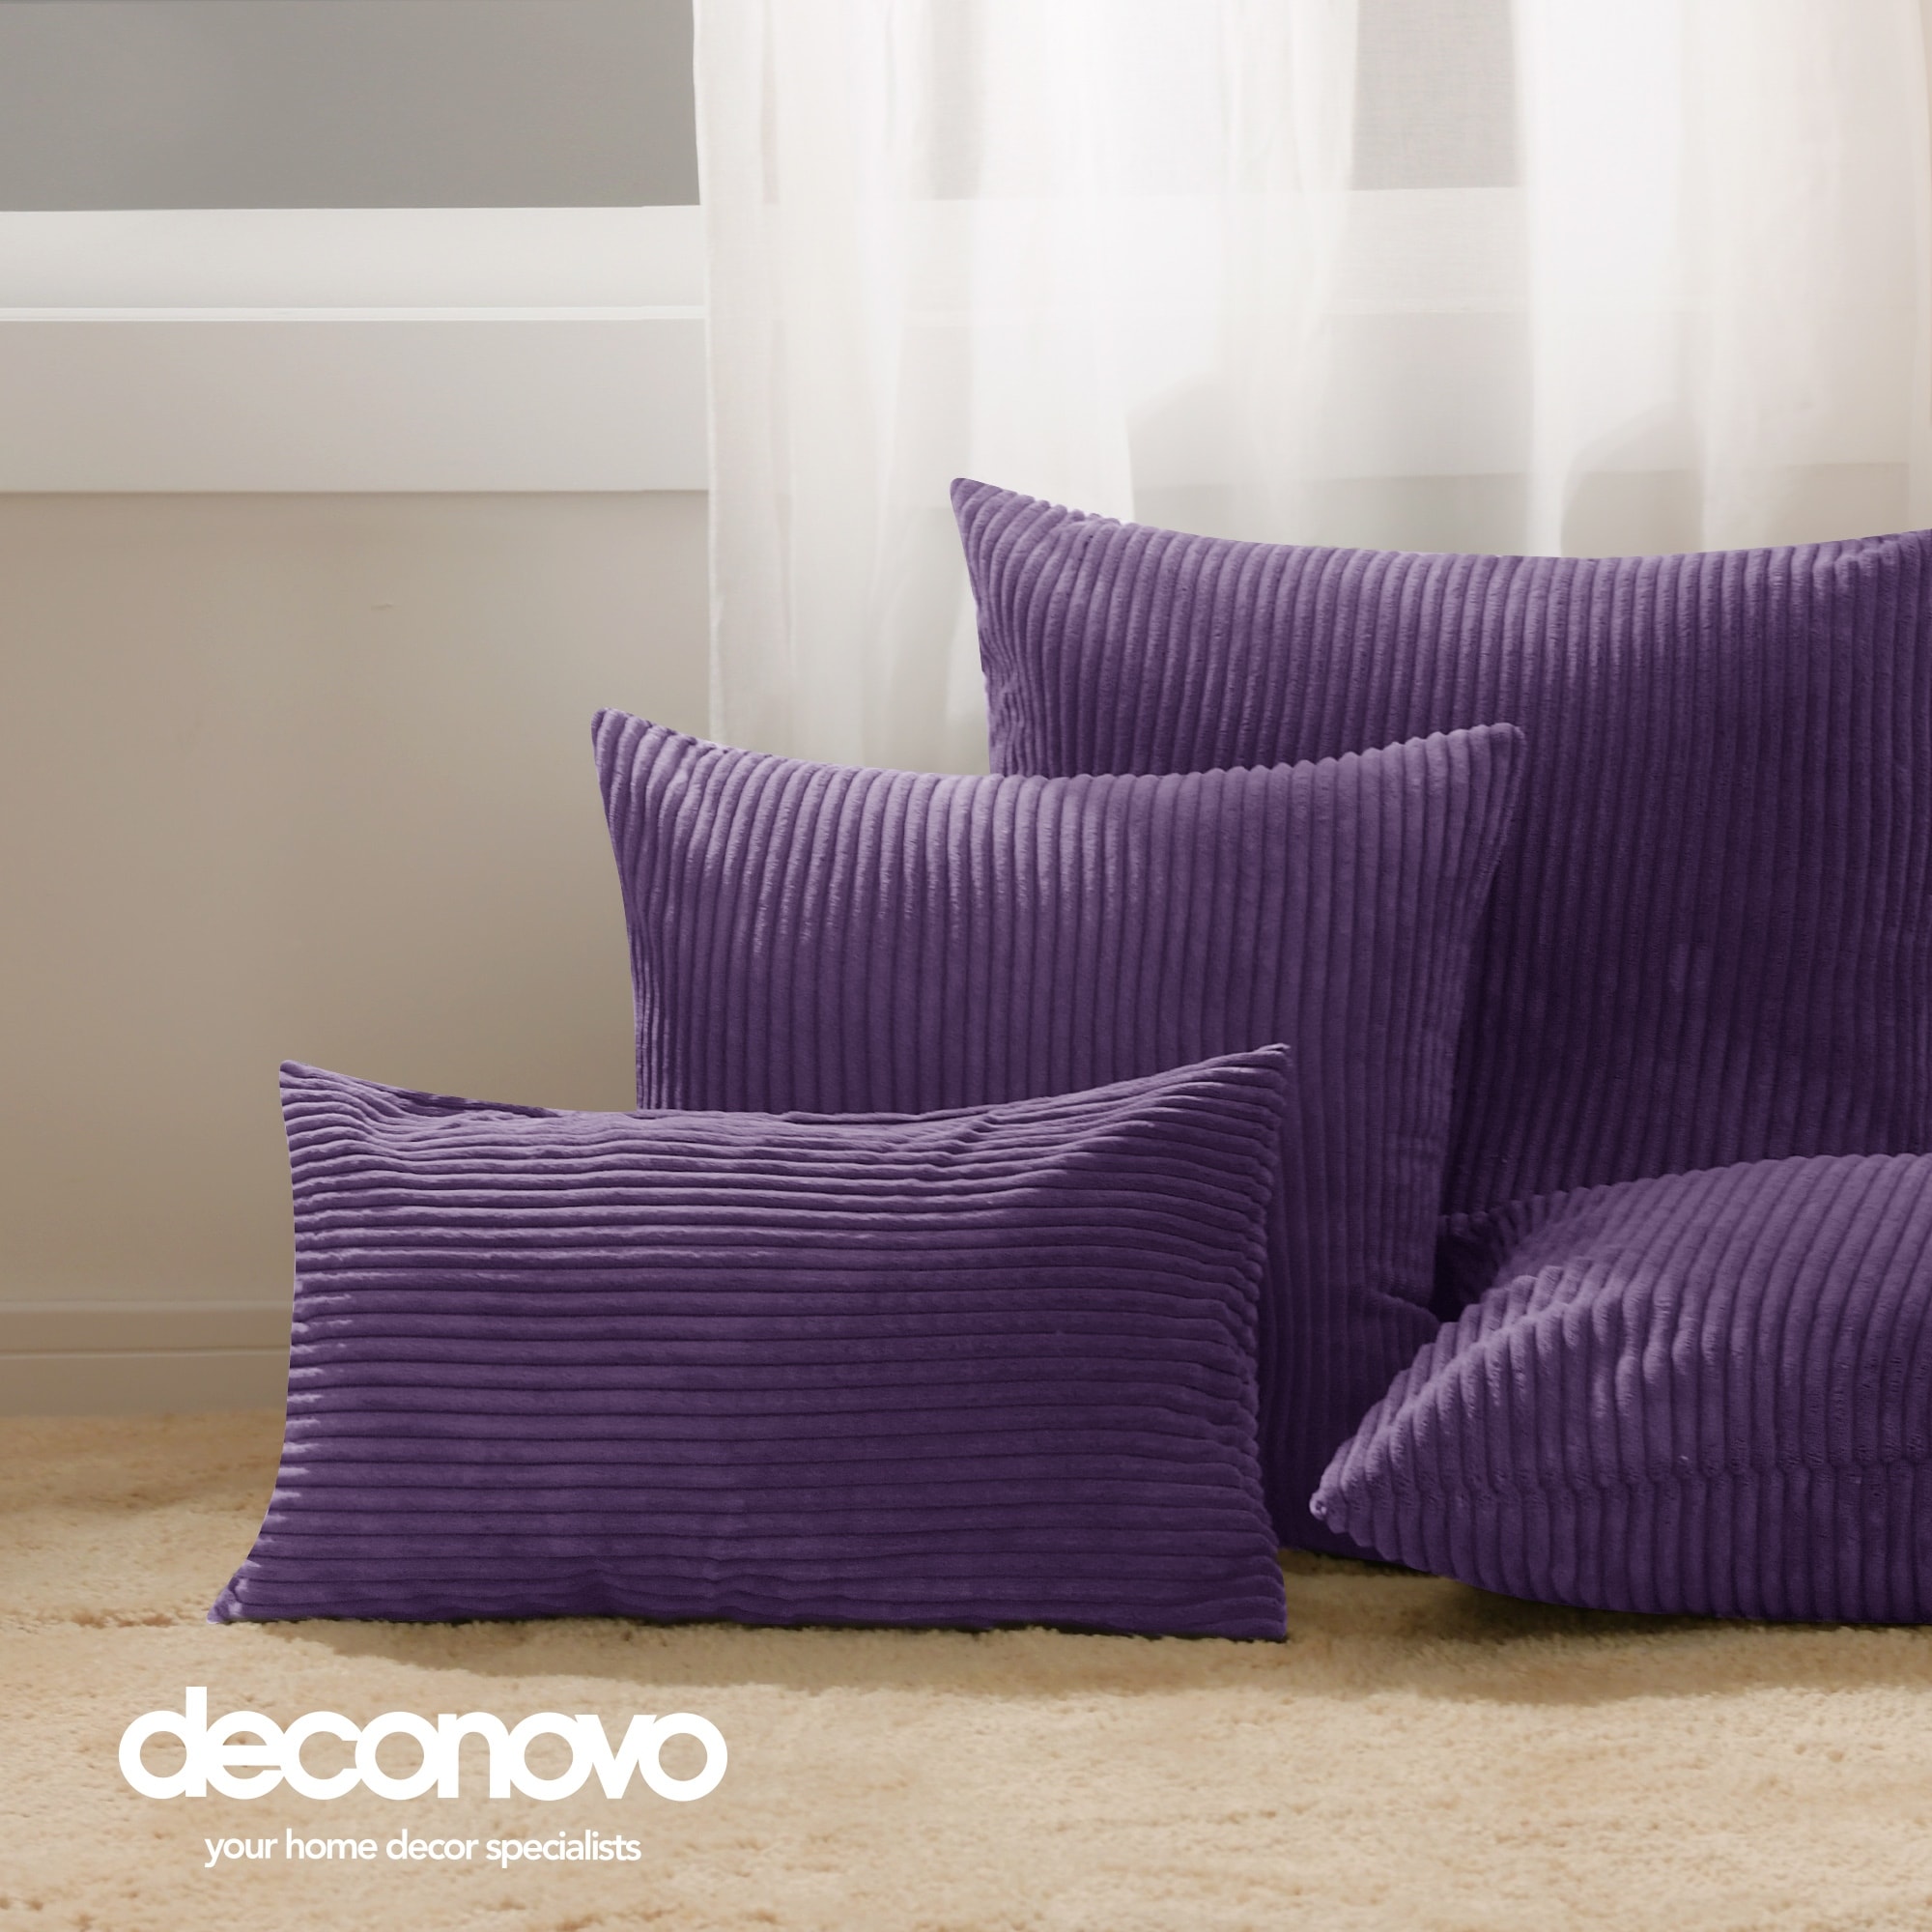 https://ak1.ostkcdn.com/images/products/is/images/direct/e17a5395f0cea815ab00bd20c08e787b699aea9d/Deconovo-Corduroy-Throw-Pillow-Covers-with-Stripe-2-Pieces.jpg